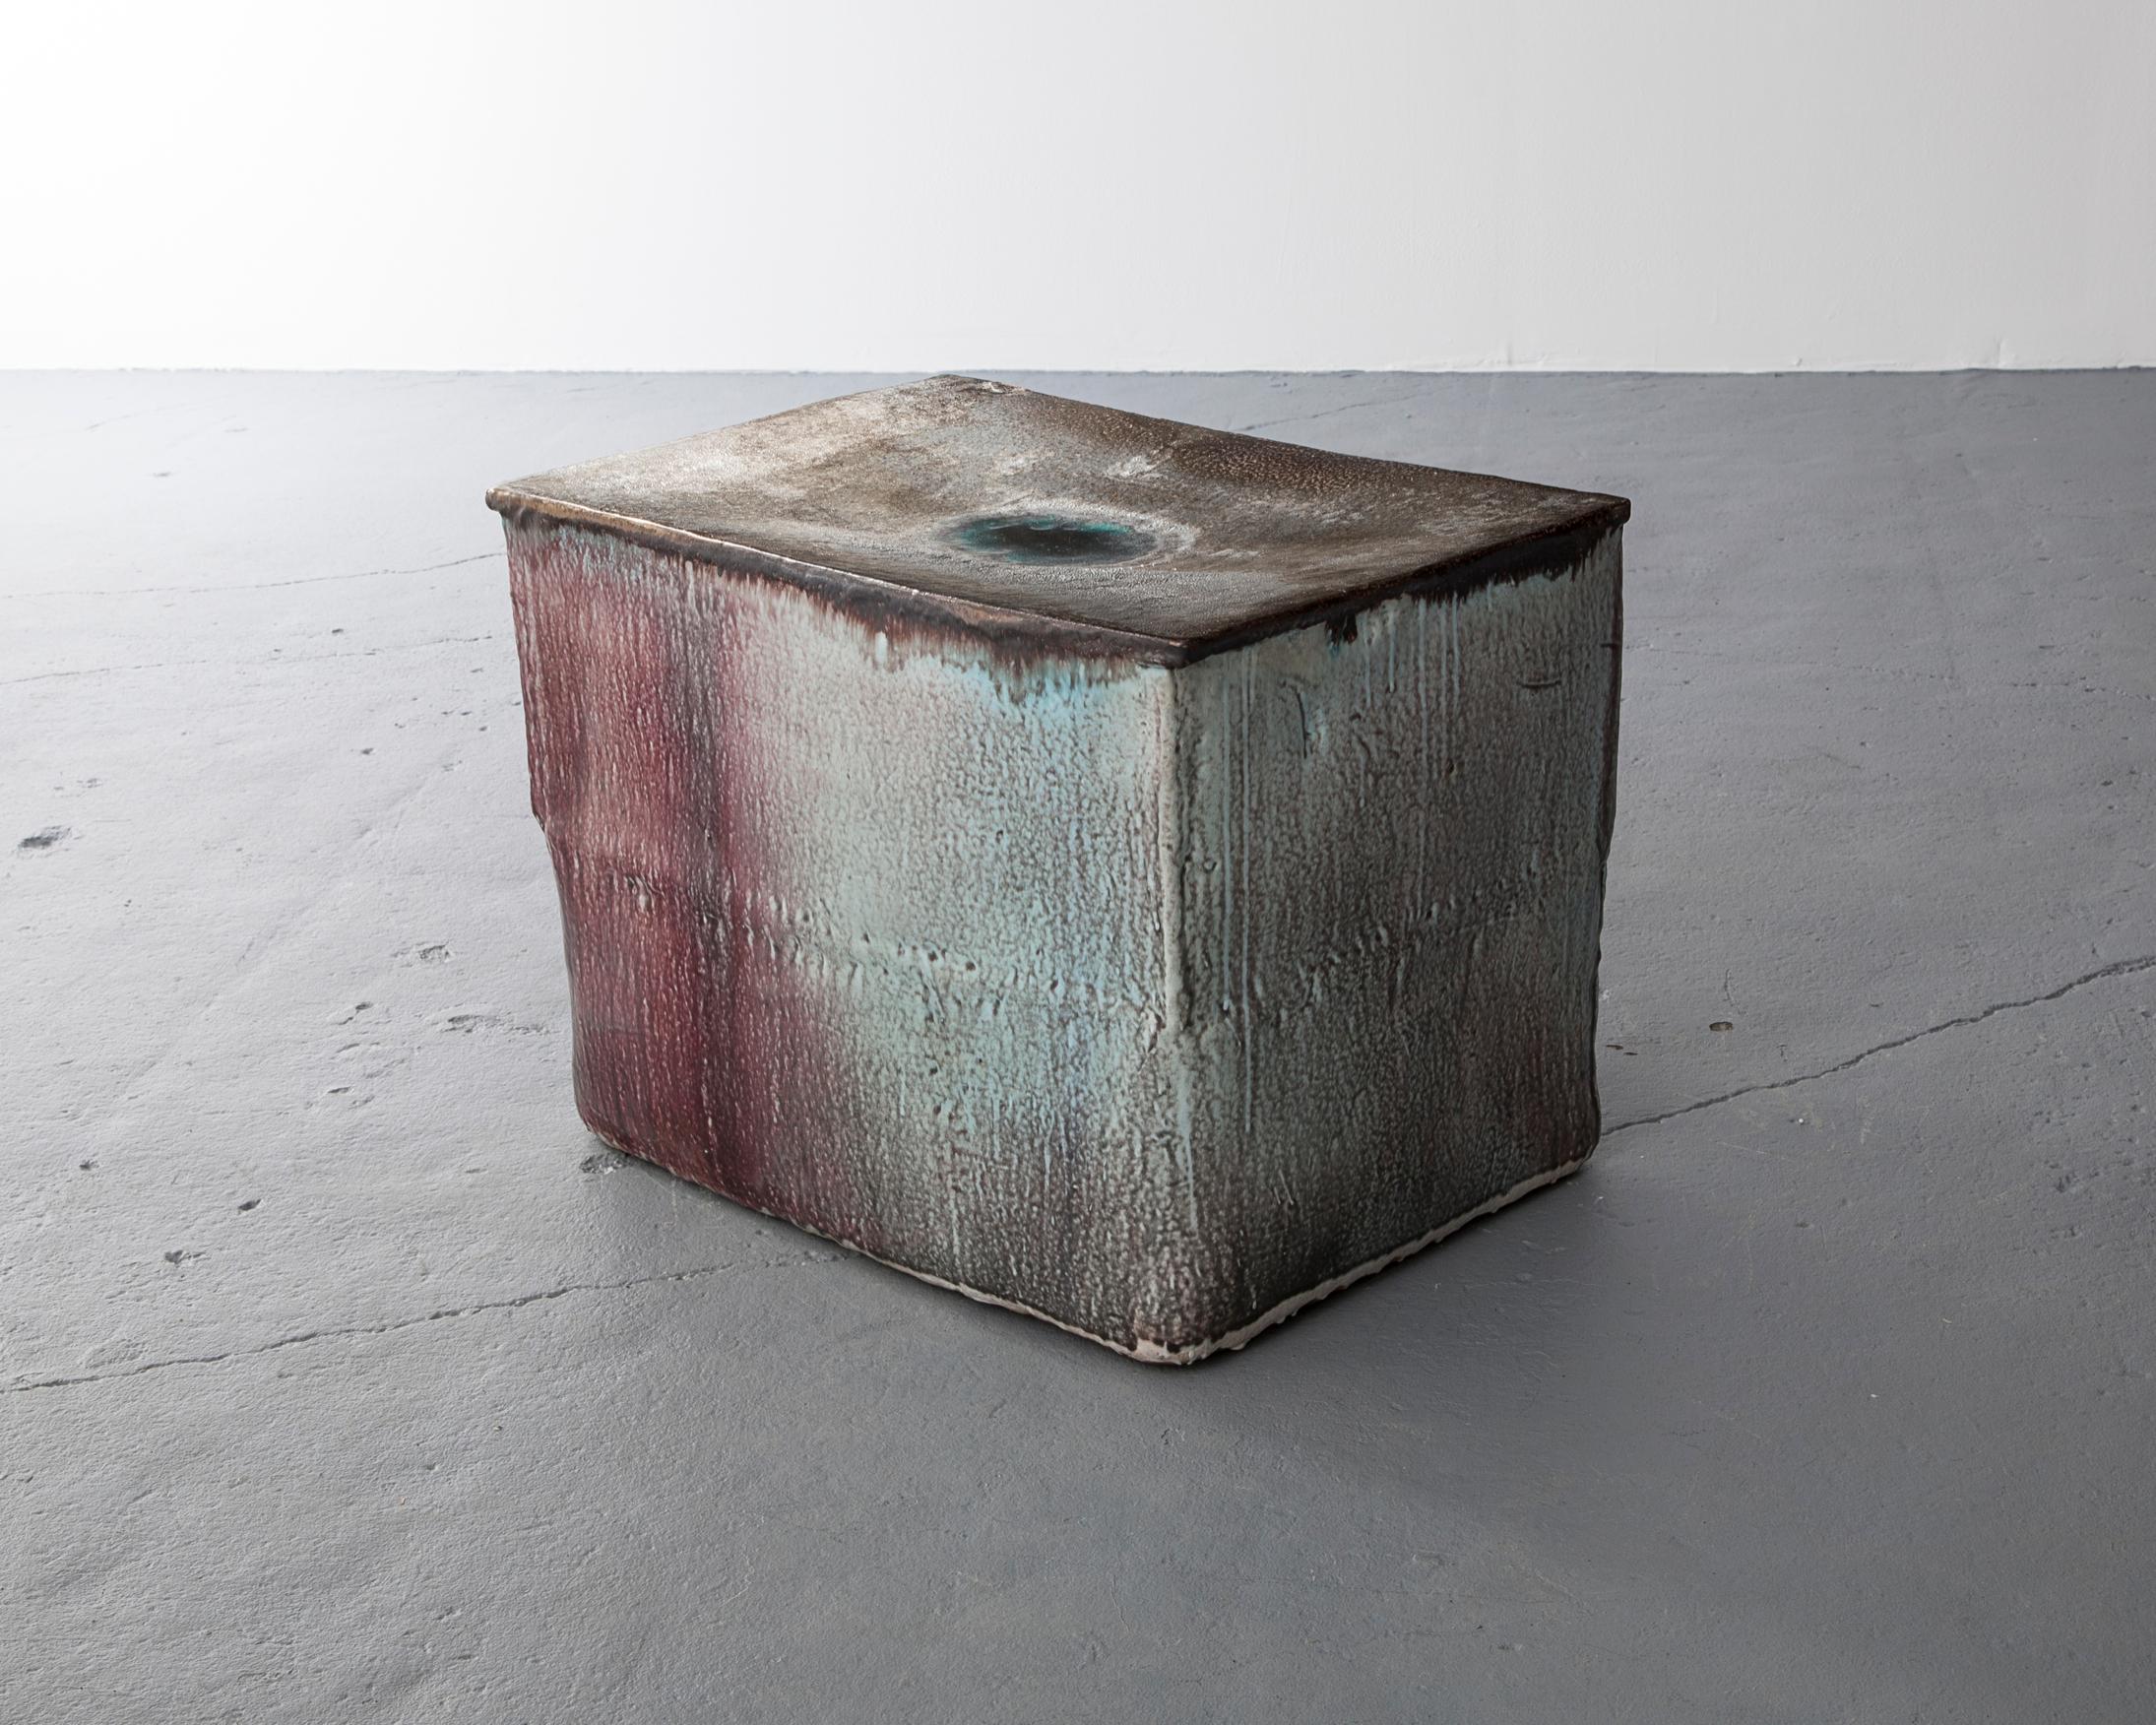 Ceramic stool in purple glaze with metal effect top. Designed and made by Hun-Chung Lee, Korea, 2010.
 